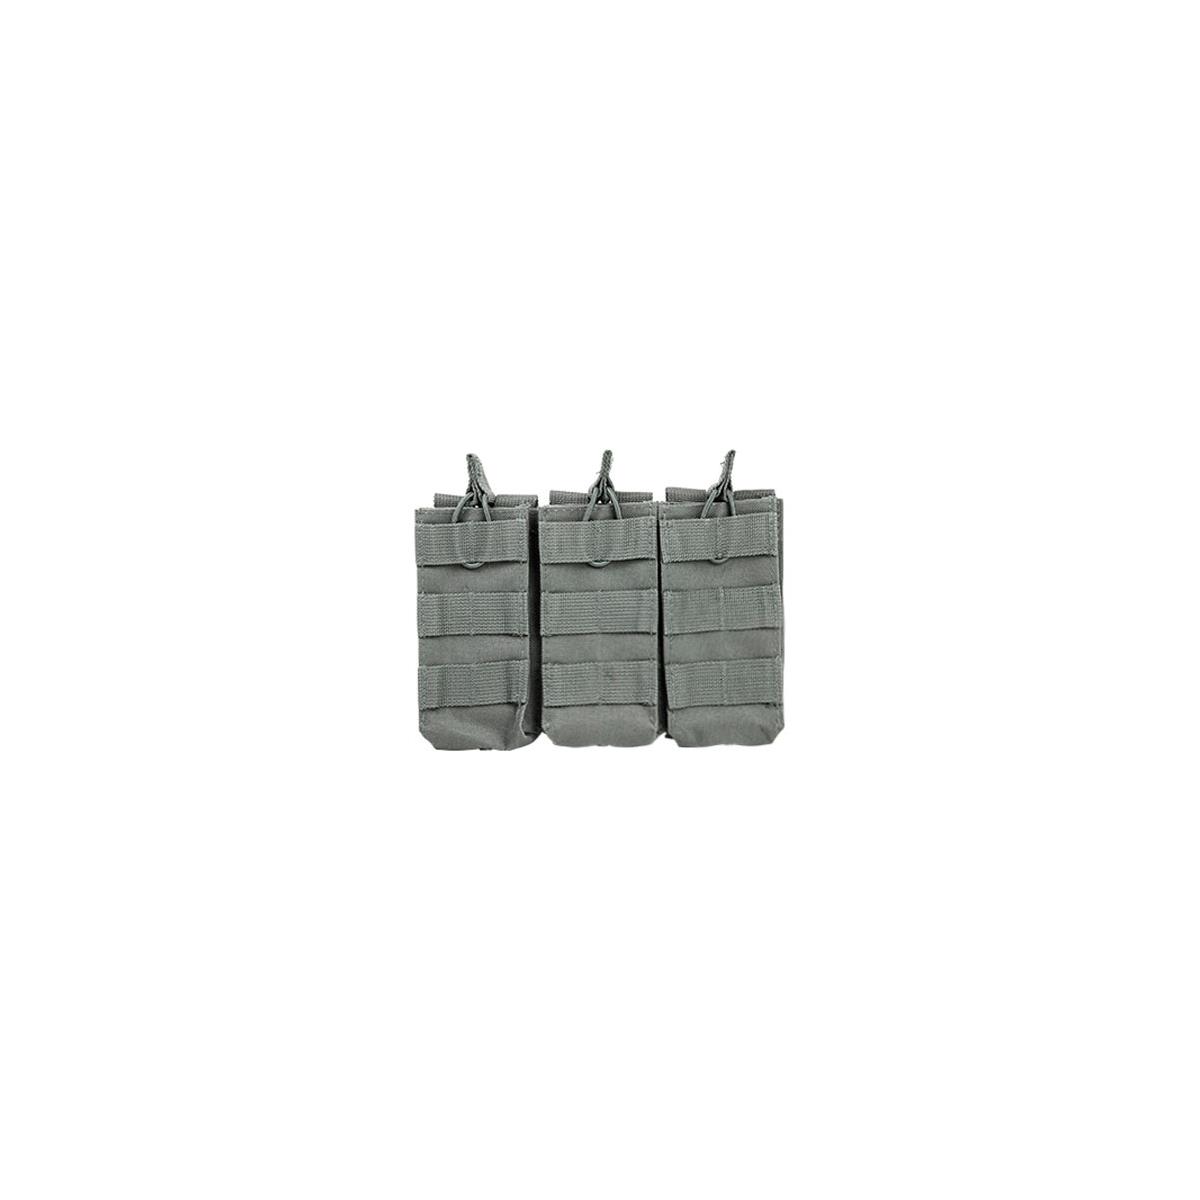 Image of NcSTAR Vism Triple AR Mag Pouch